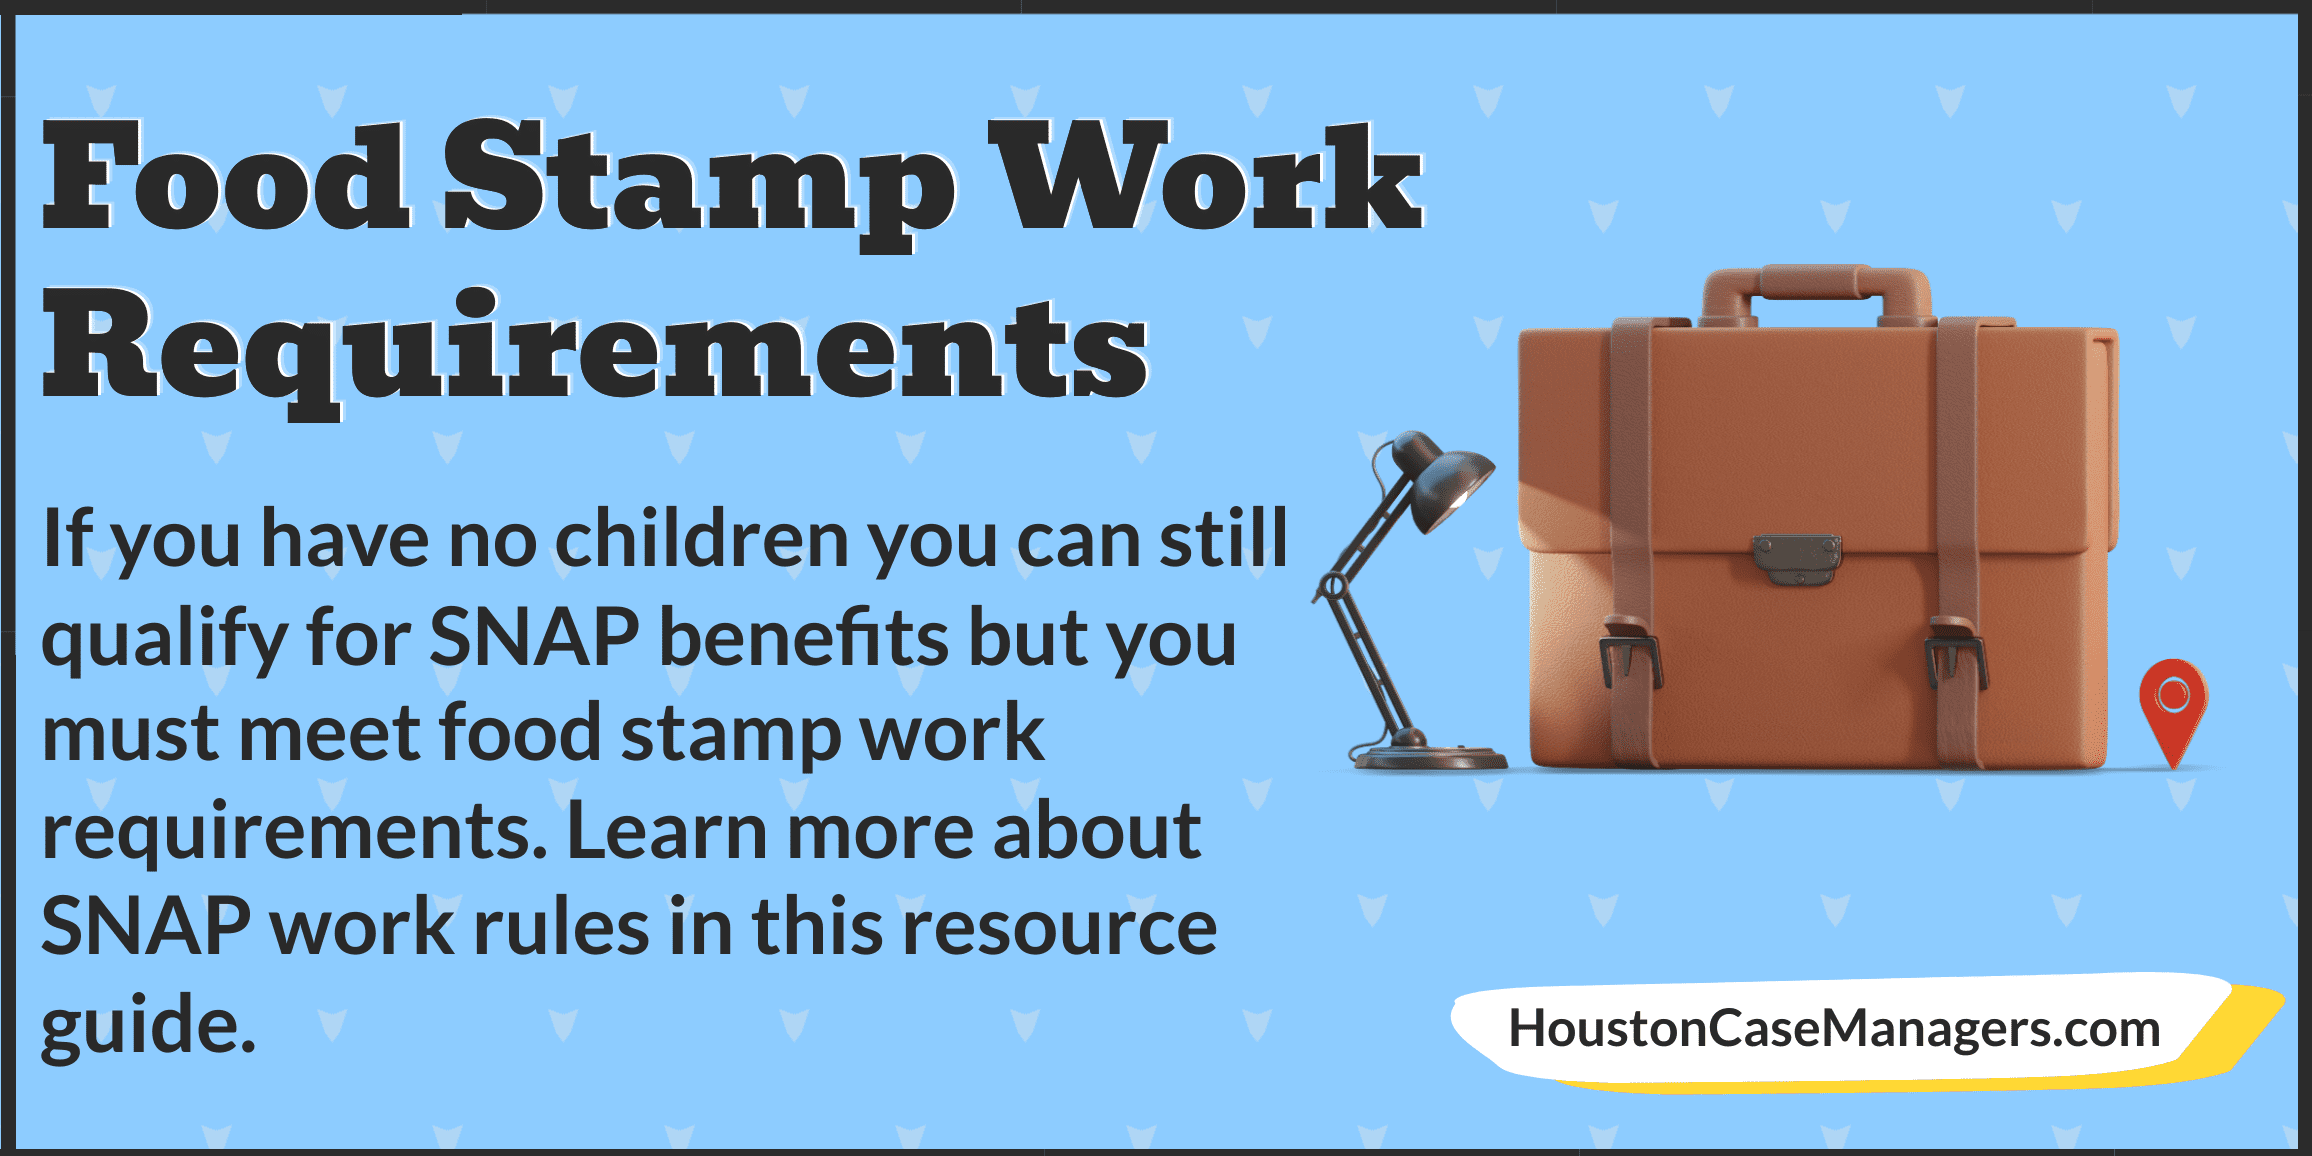 What Are The Food Stamp Work Requirements?